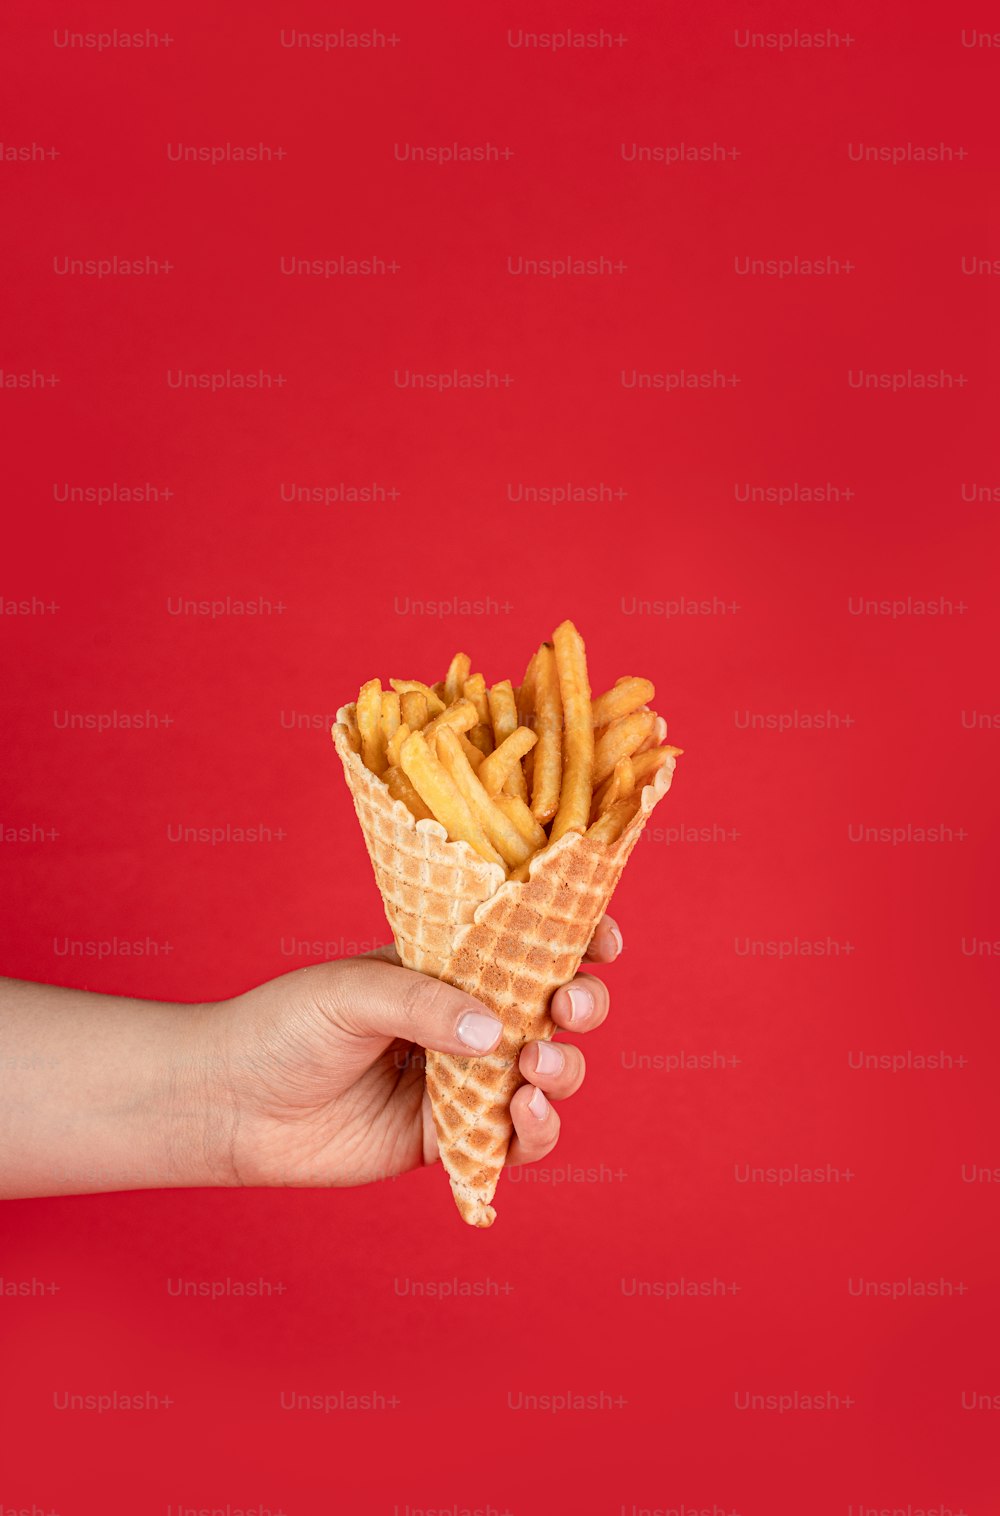 a hand holding a waffle cone filled with french fries